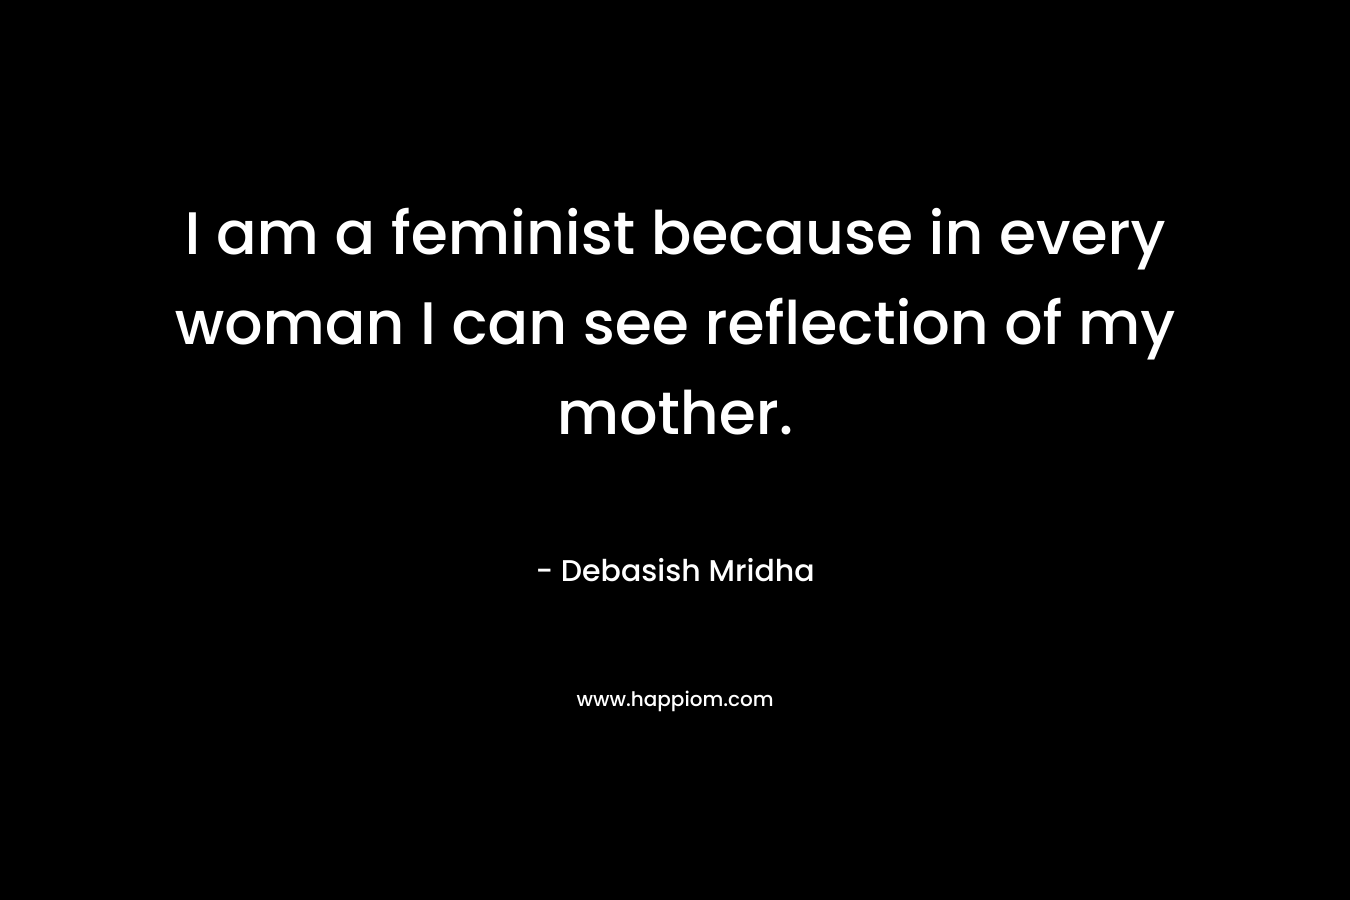 I am a feminist because in every woman I can see reflection of my mother.